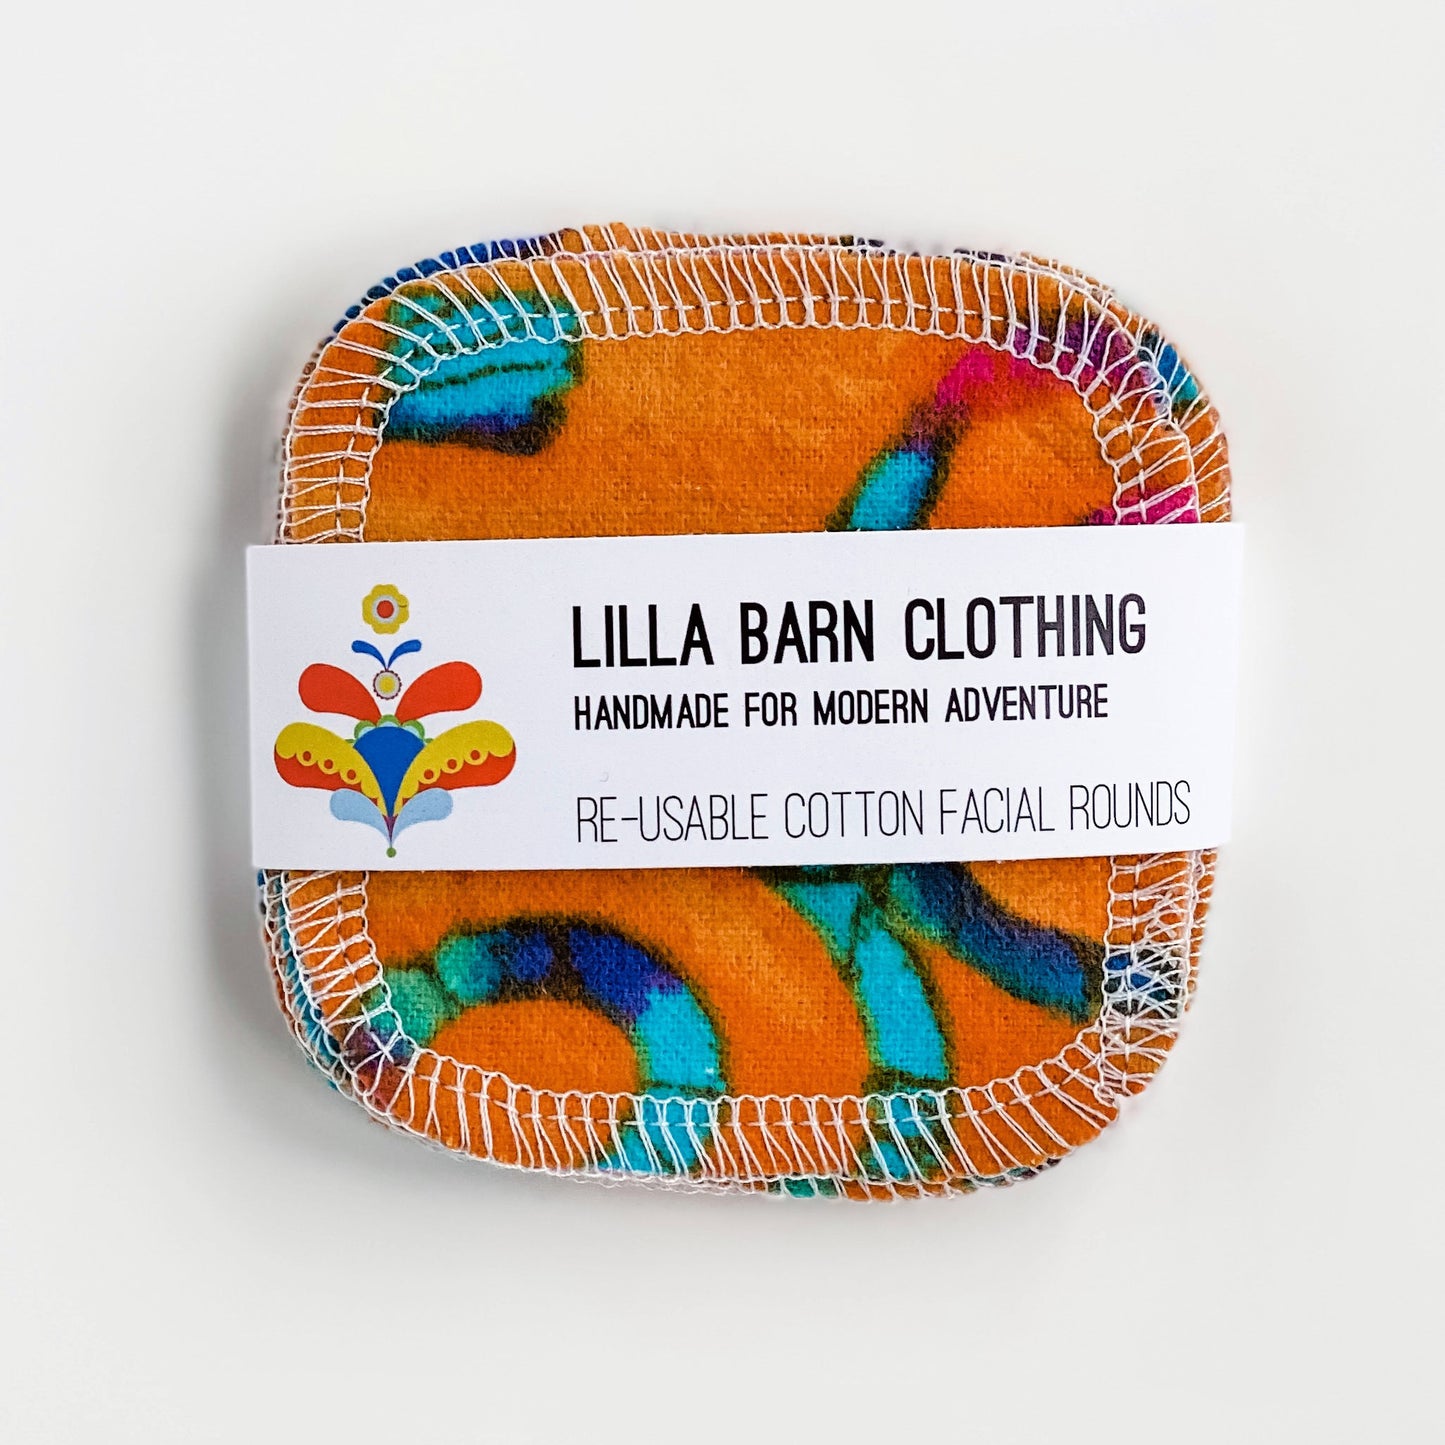 Lilla Barn Clothing Sustainable Re-usable Cotton Facial Rounds 